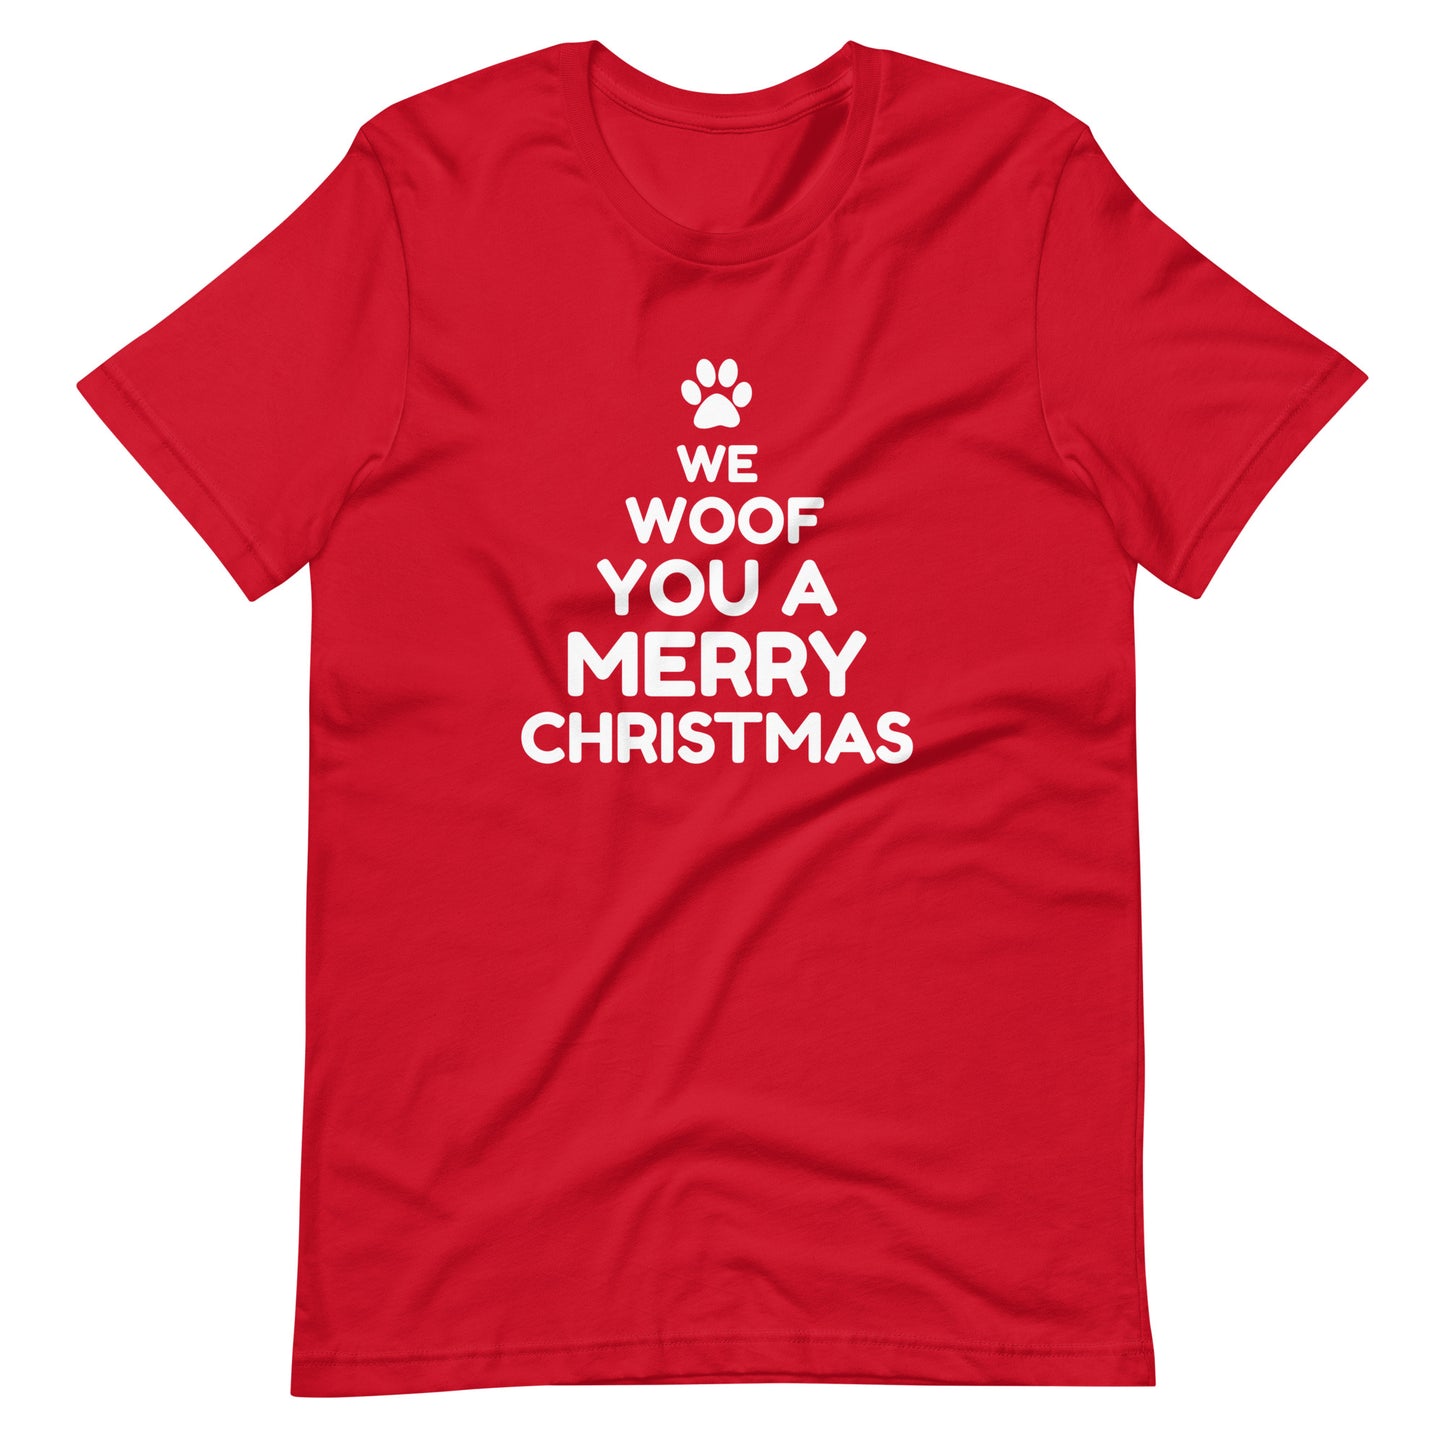 We Woof You a Merry Christmas T-Shirt